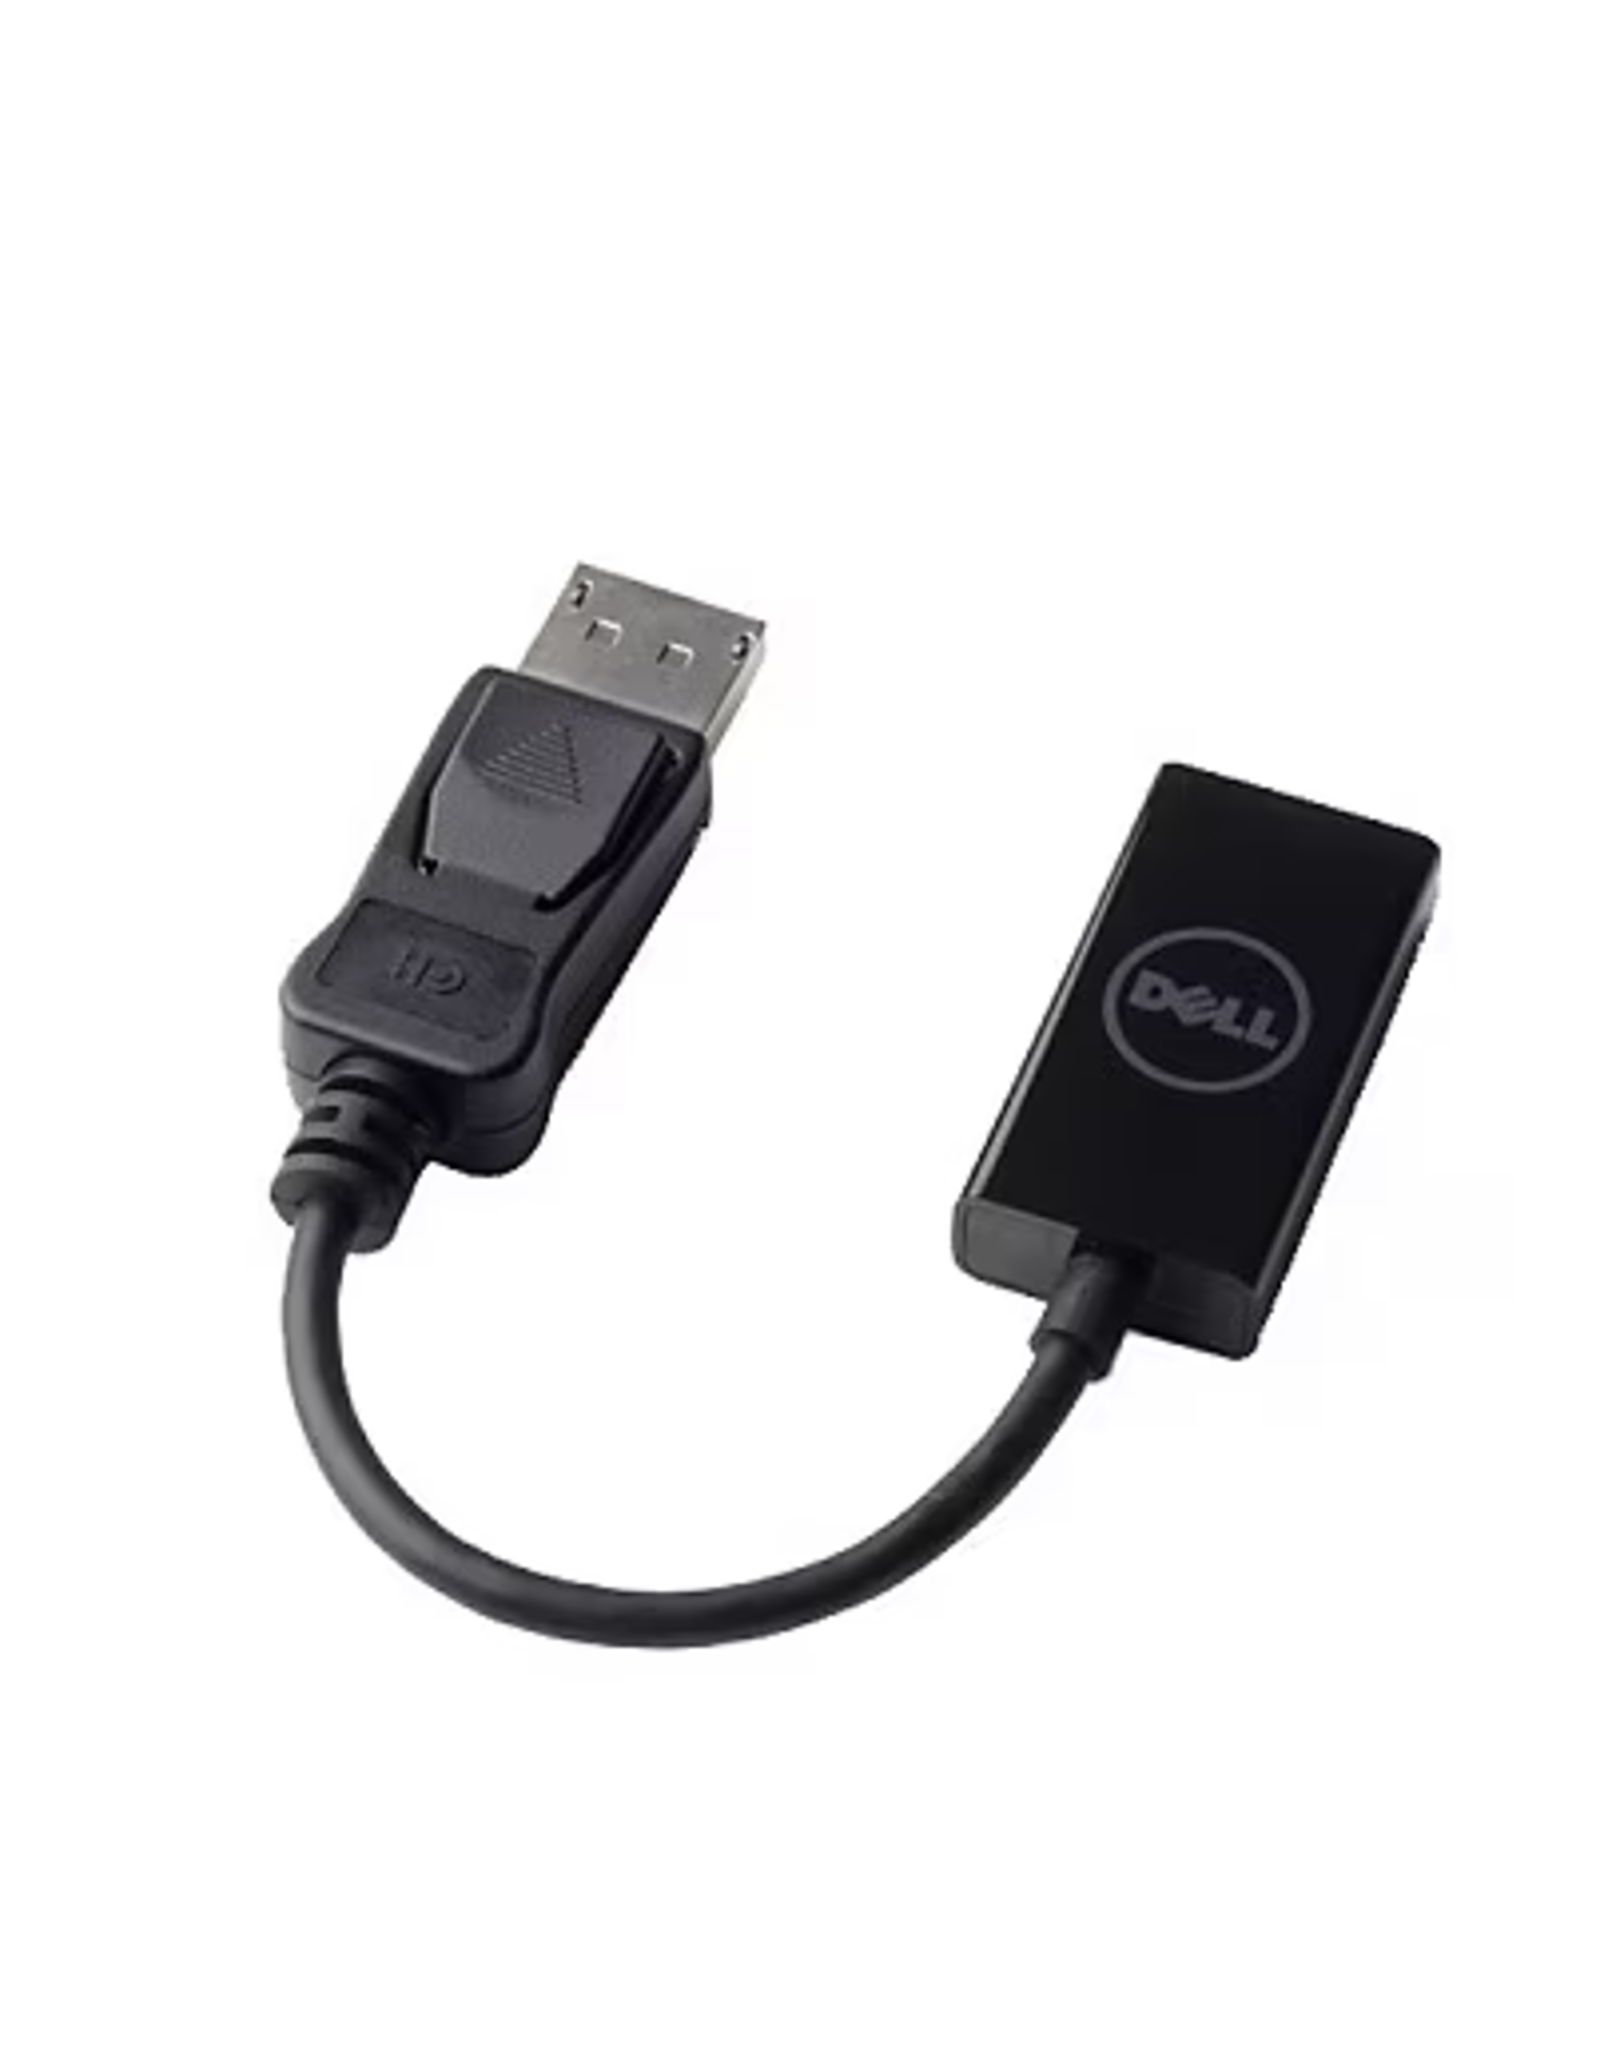 DELL DELL ADAPTER DISPLAY PORT TO HDMI 2.0 4K